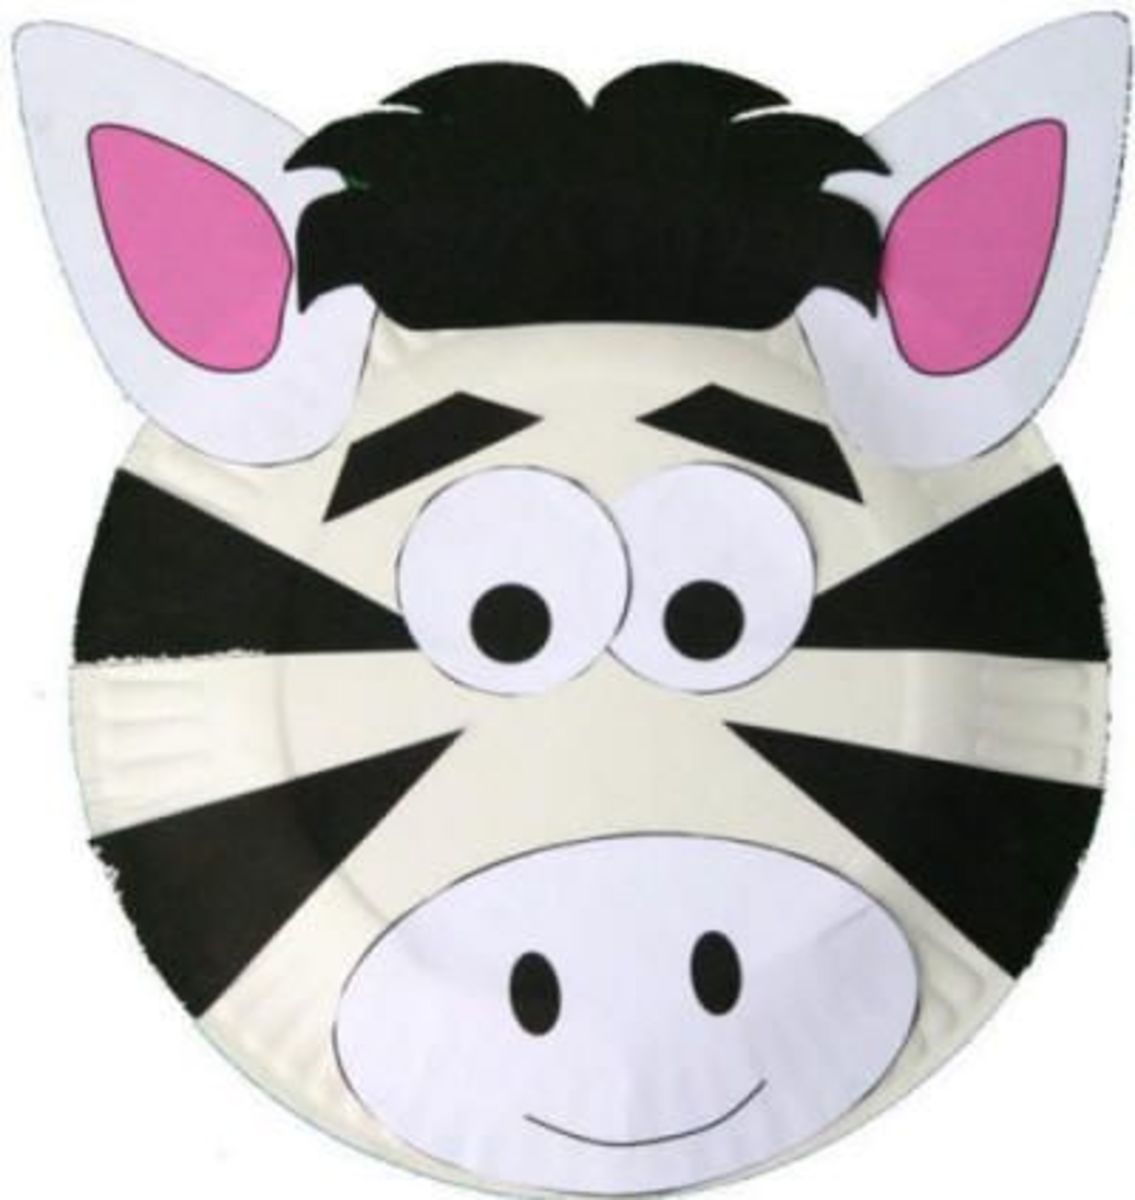 How to Make a Paper Plate Zebra HubPages